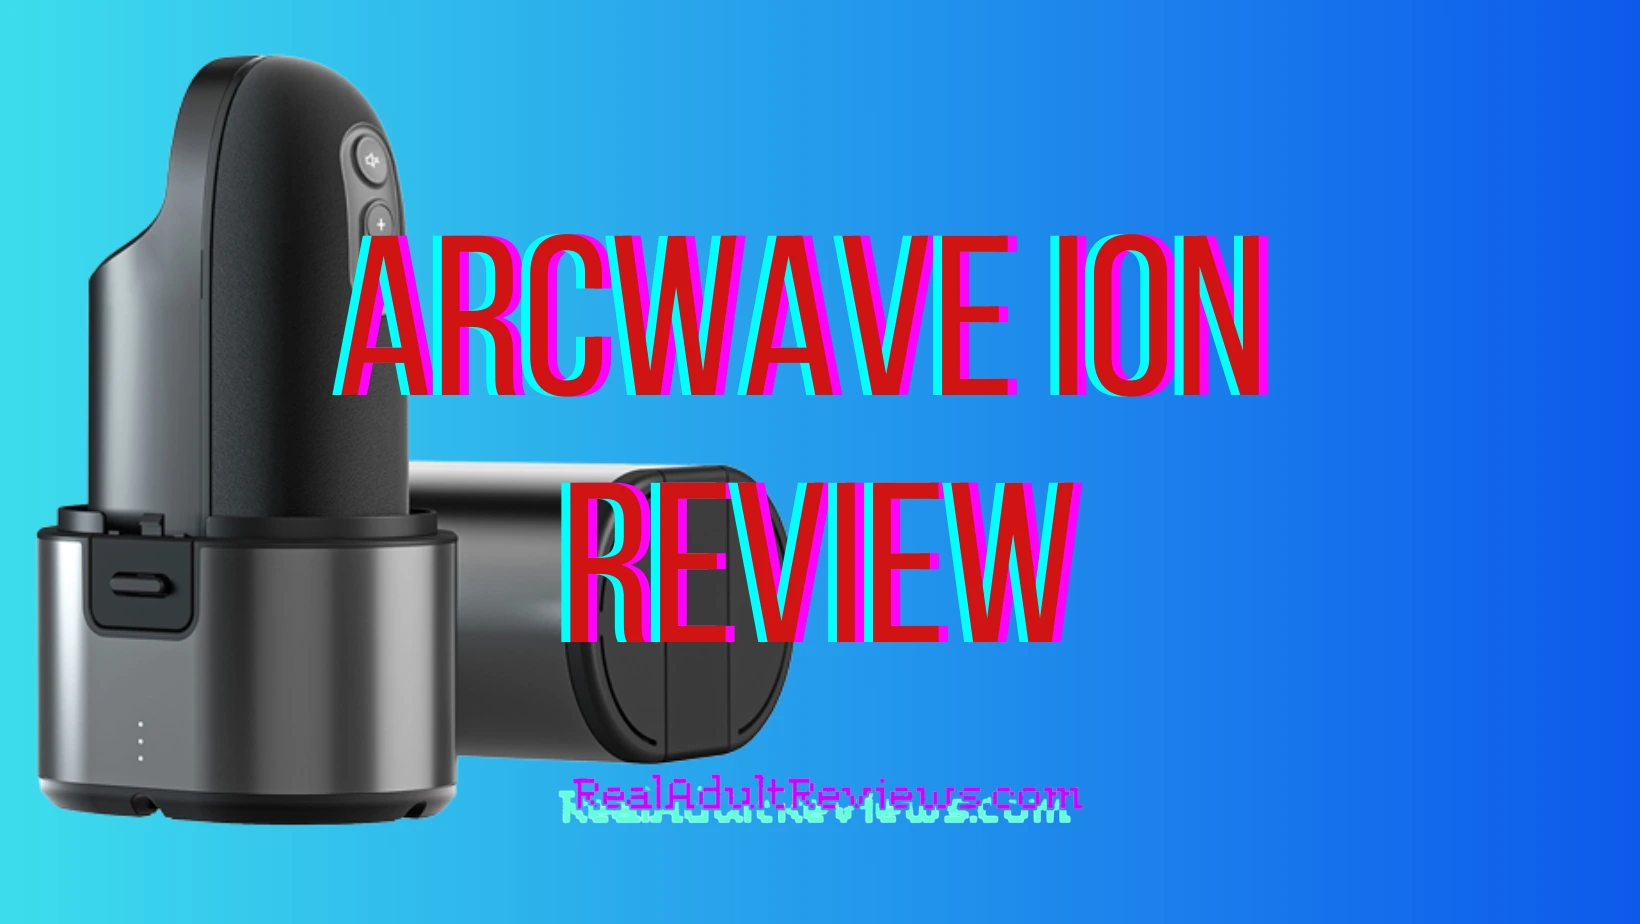 Can Men Experience a Woman's Orgasm? Arcwave Ion Masturbator Review